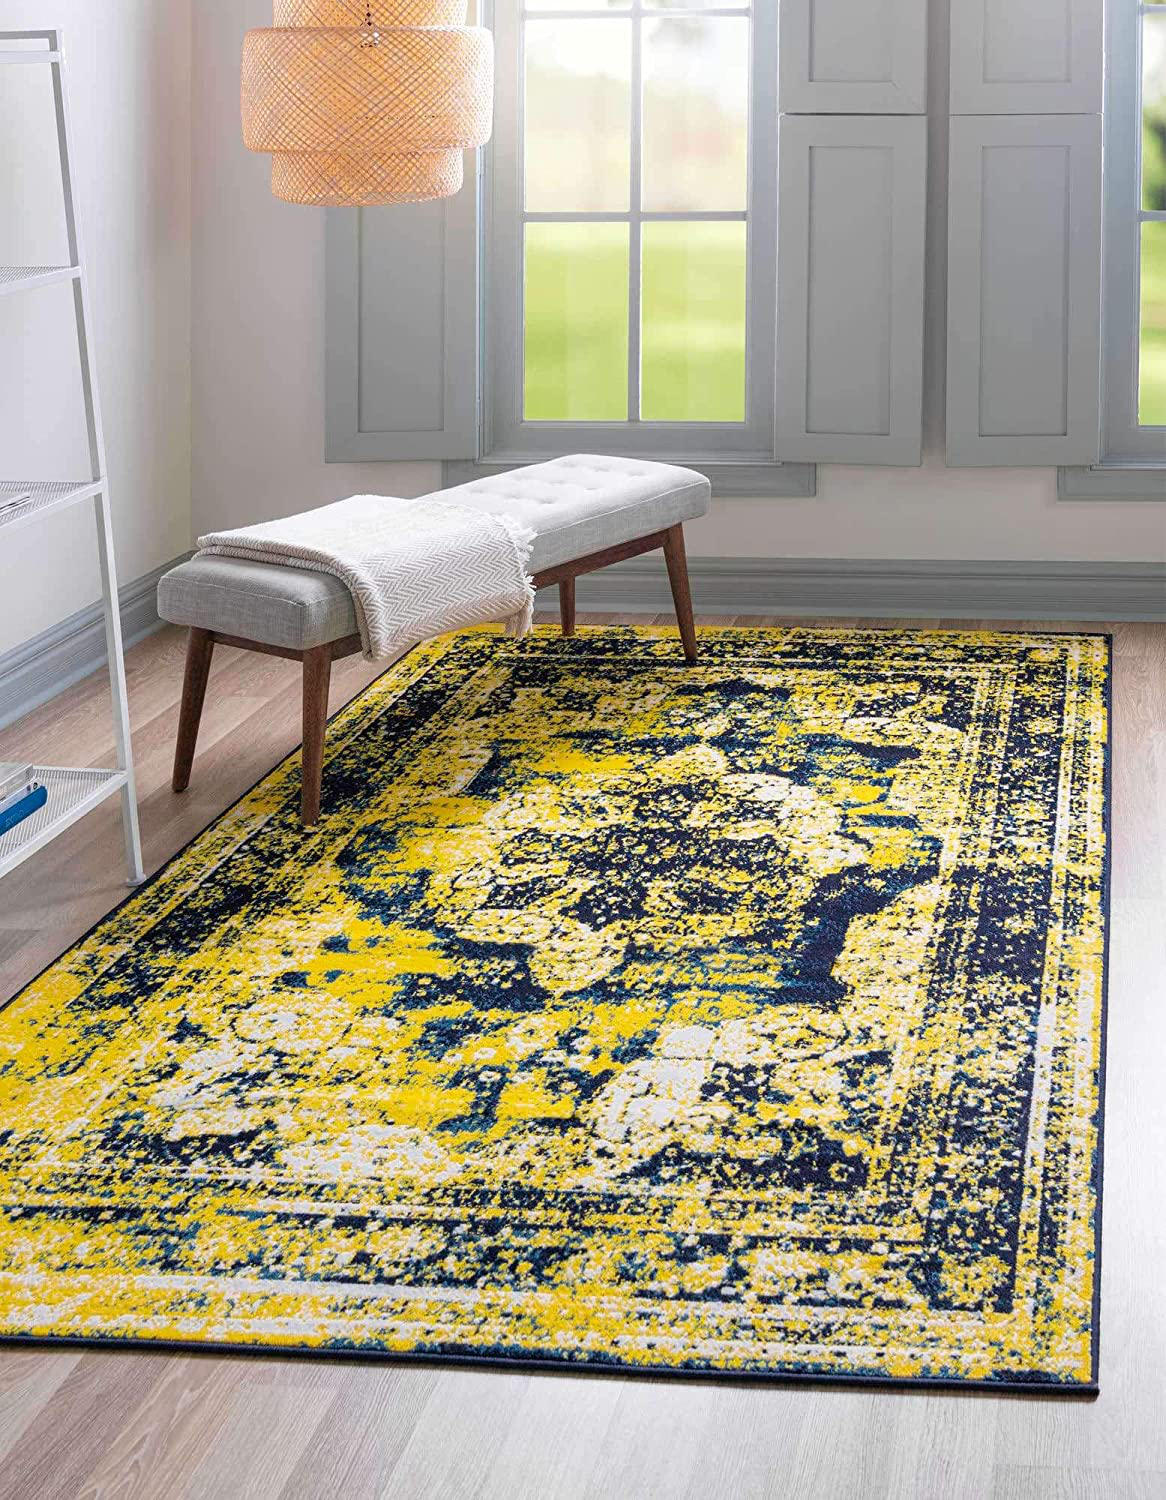 Unique Loom Sofia Collection Area Traditional Vintage Rug, French Inspired Perfect for All Home Décor, 5' 0 x 8' 0 Rectangular, Navy Blue/Yellow